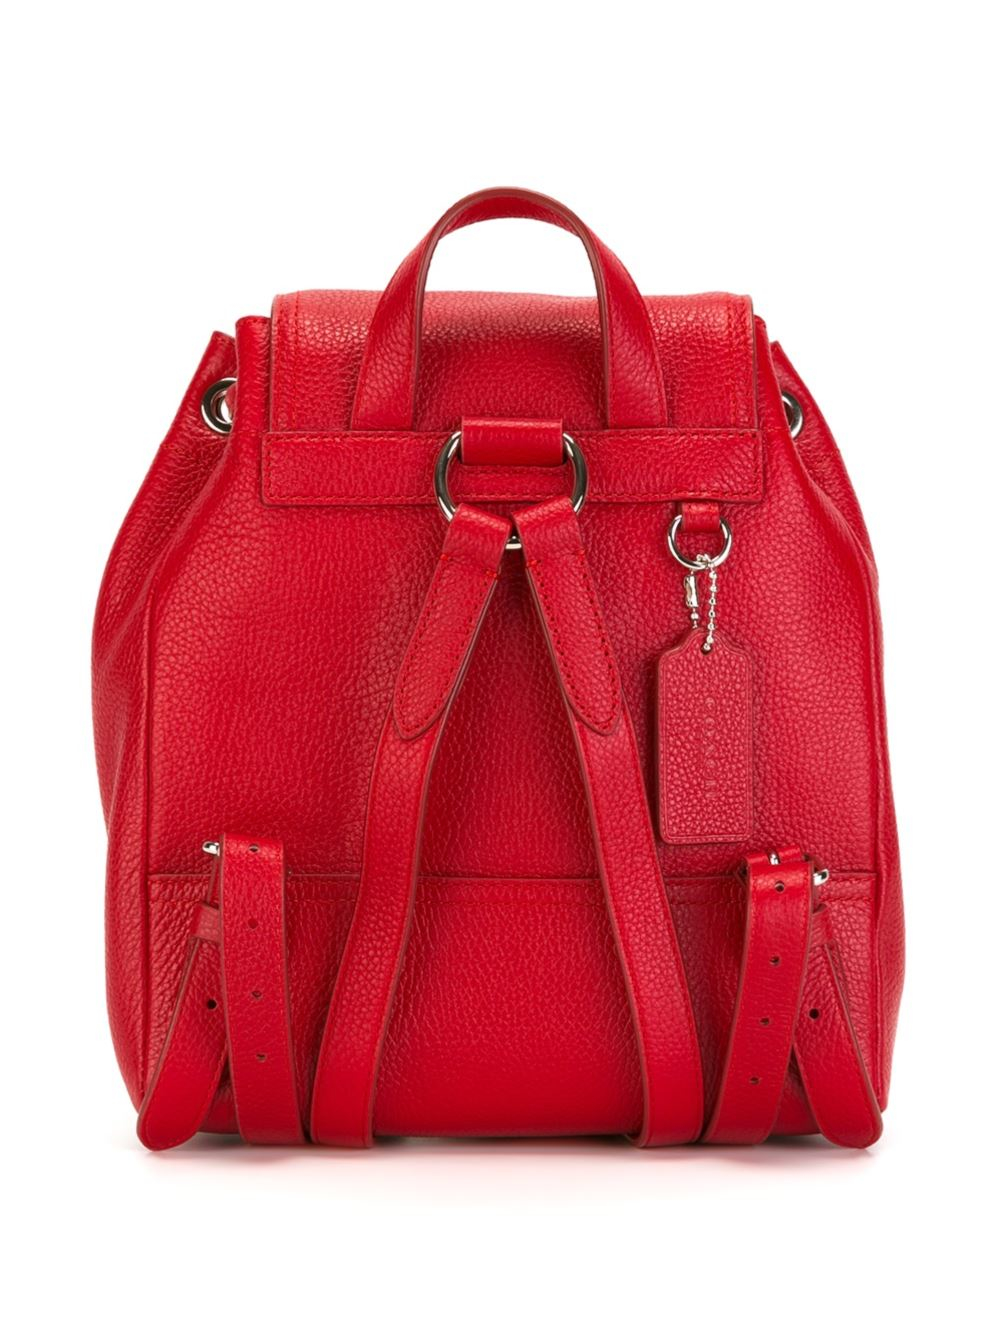 COACH Leather Small Flap Opening Backpack in Red - Lyst